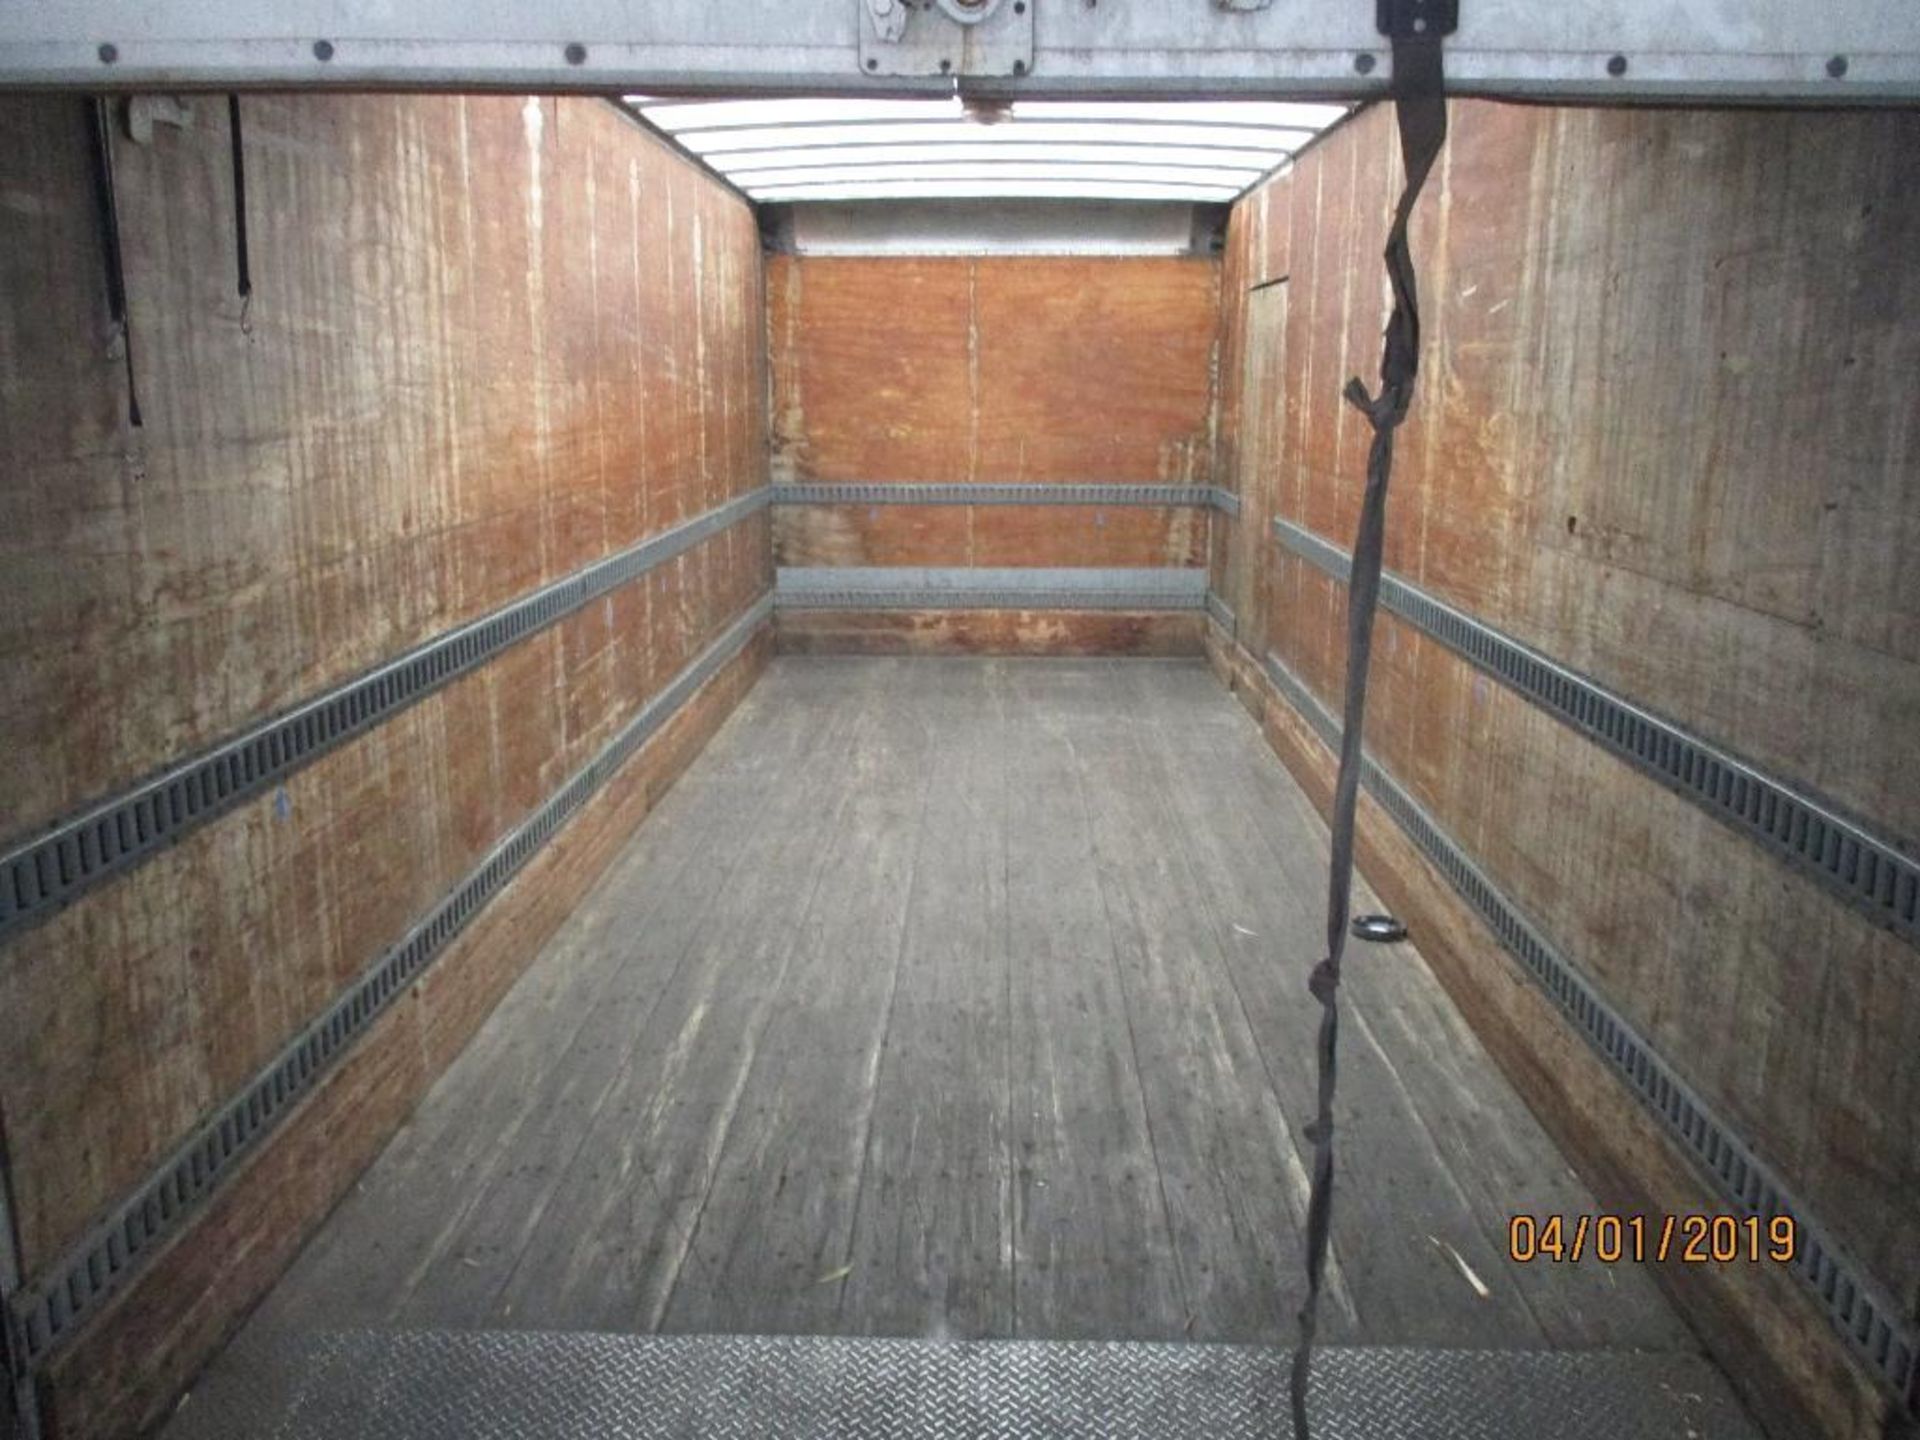 2000 Freightliner M/N FL70 Box Truck 24ft With Lift Gate, Six Speed Manuel, GVWR 33,000lb, 284,635 M - Image 4 of 10